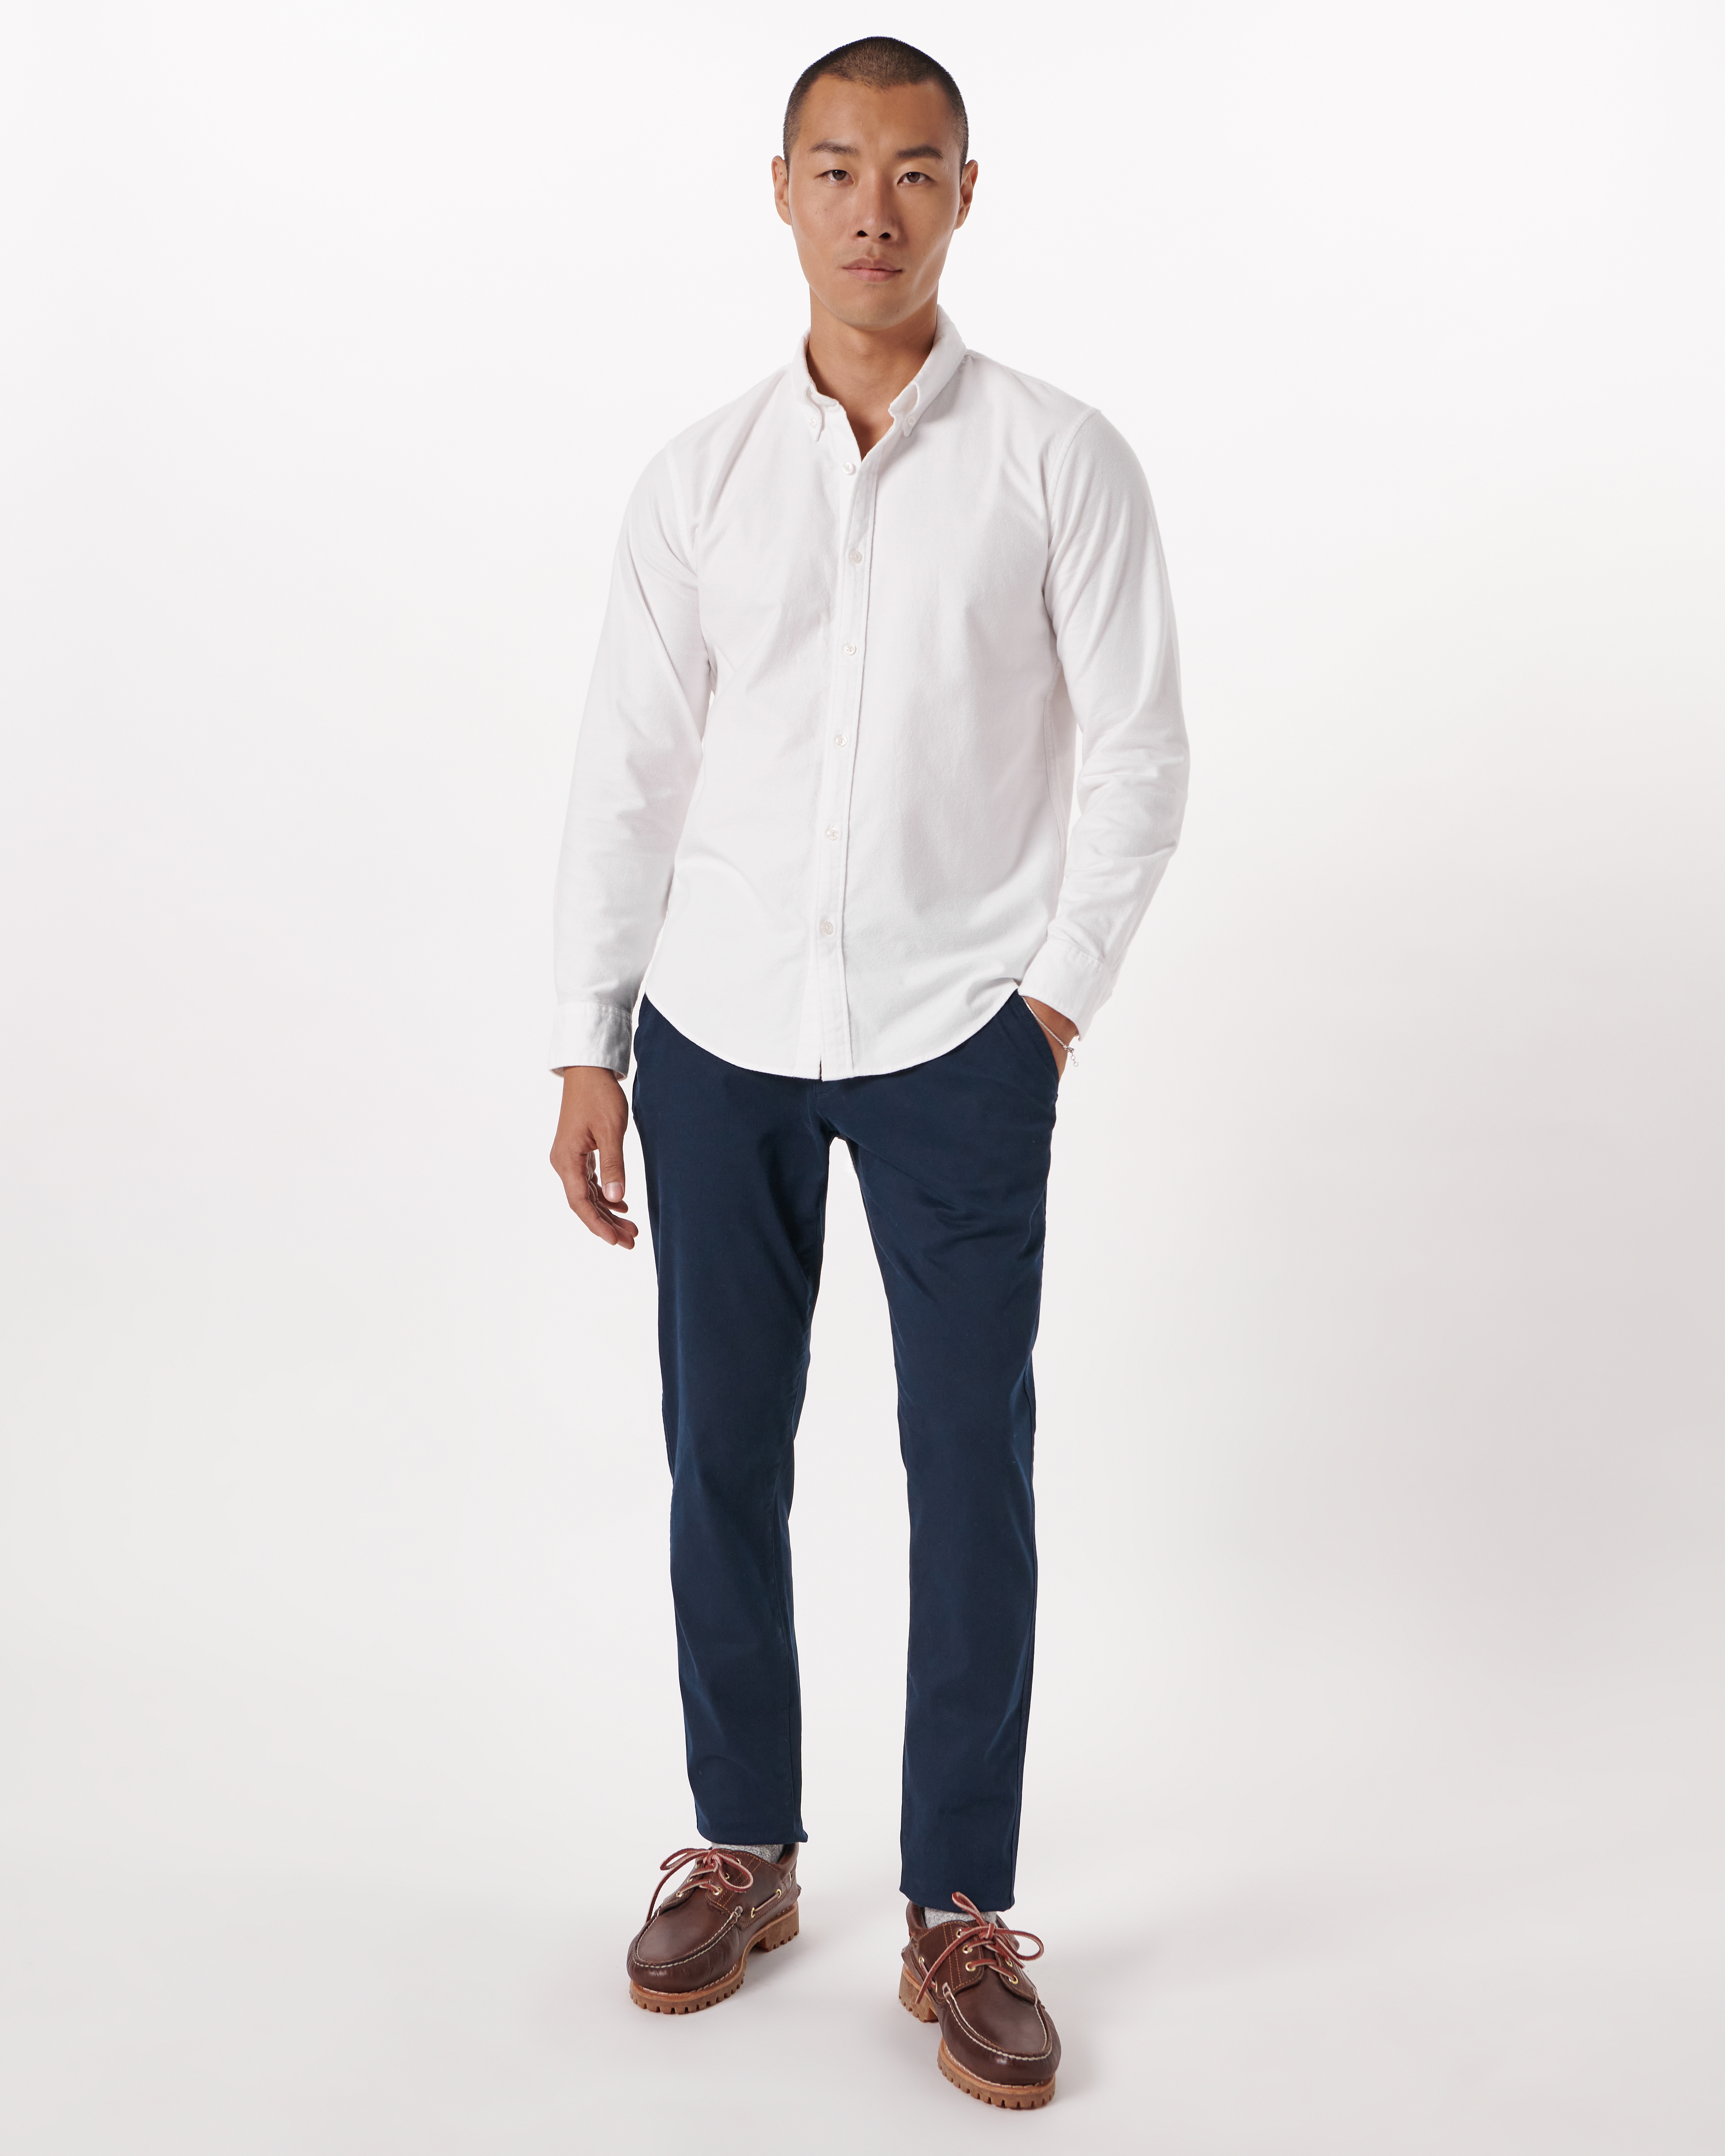 Never Pay Full Price for Athletic Slim Modern Chino